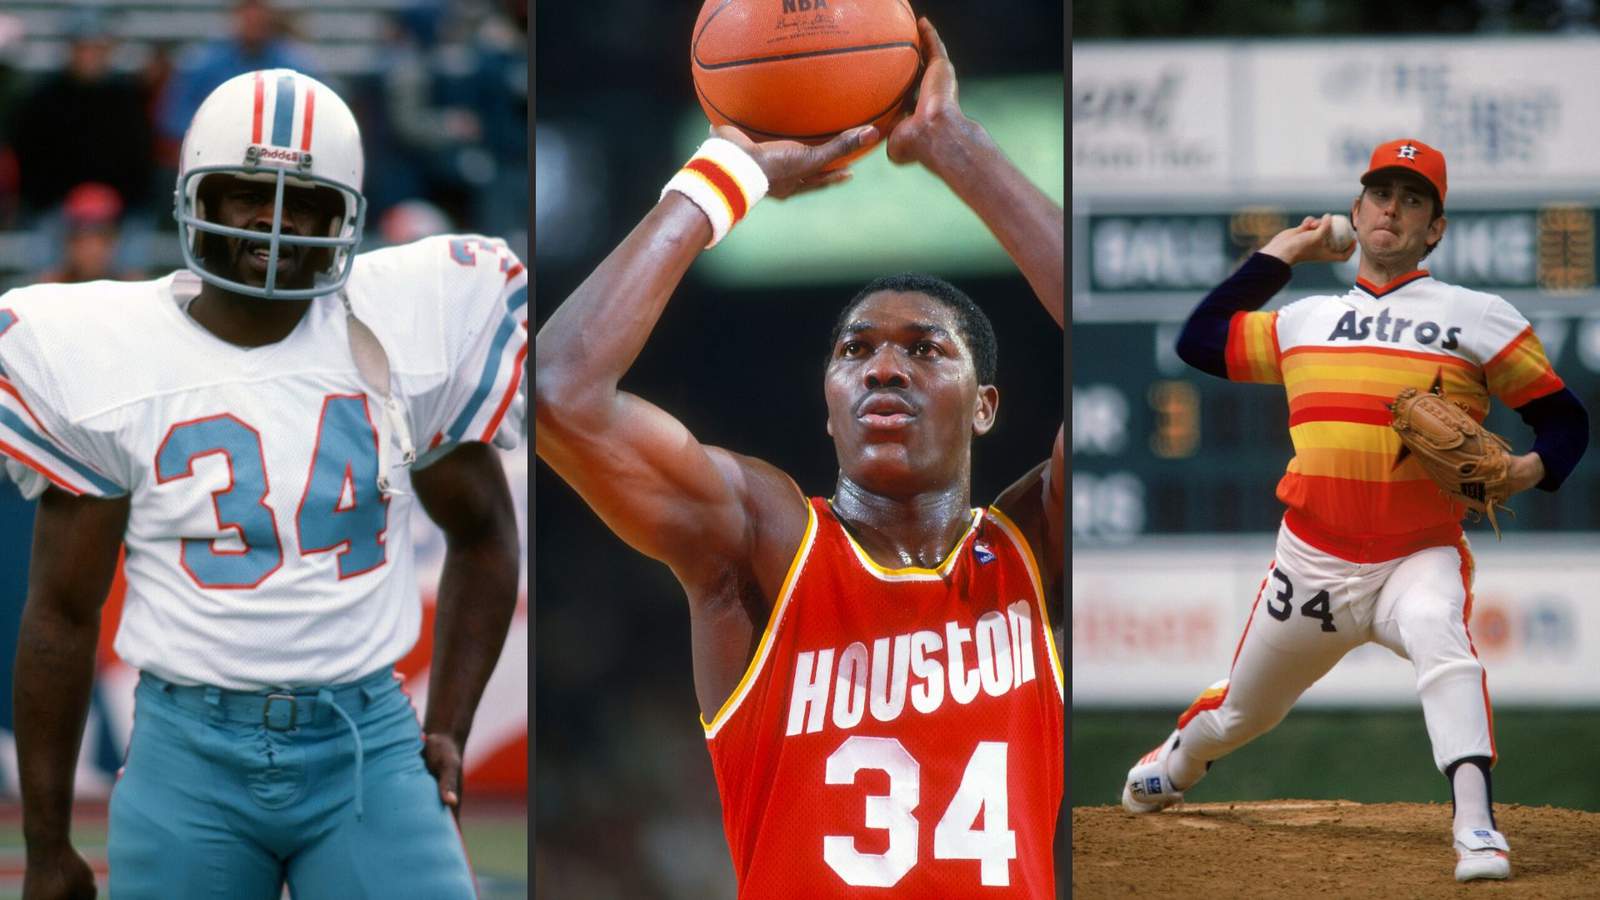 Meet your favorite Houston sports stars at the Autograph Show of Texas